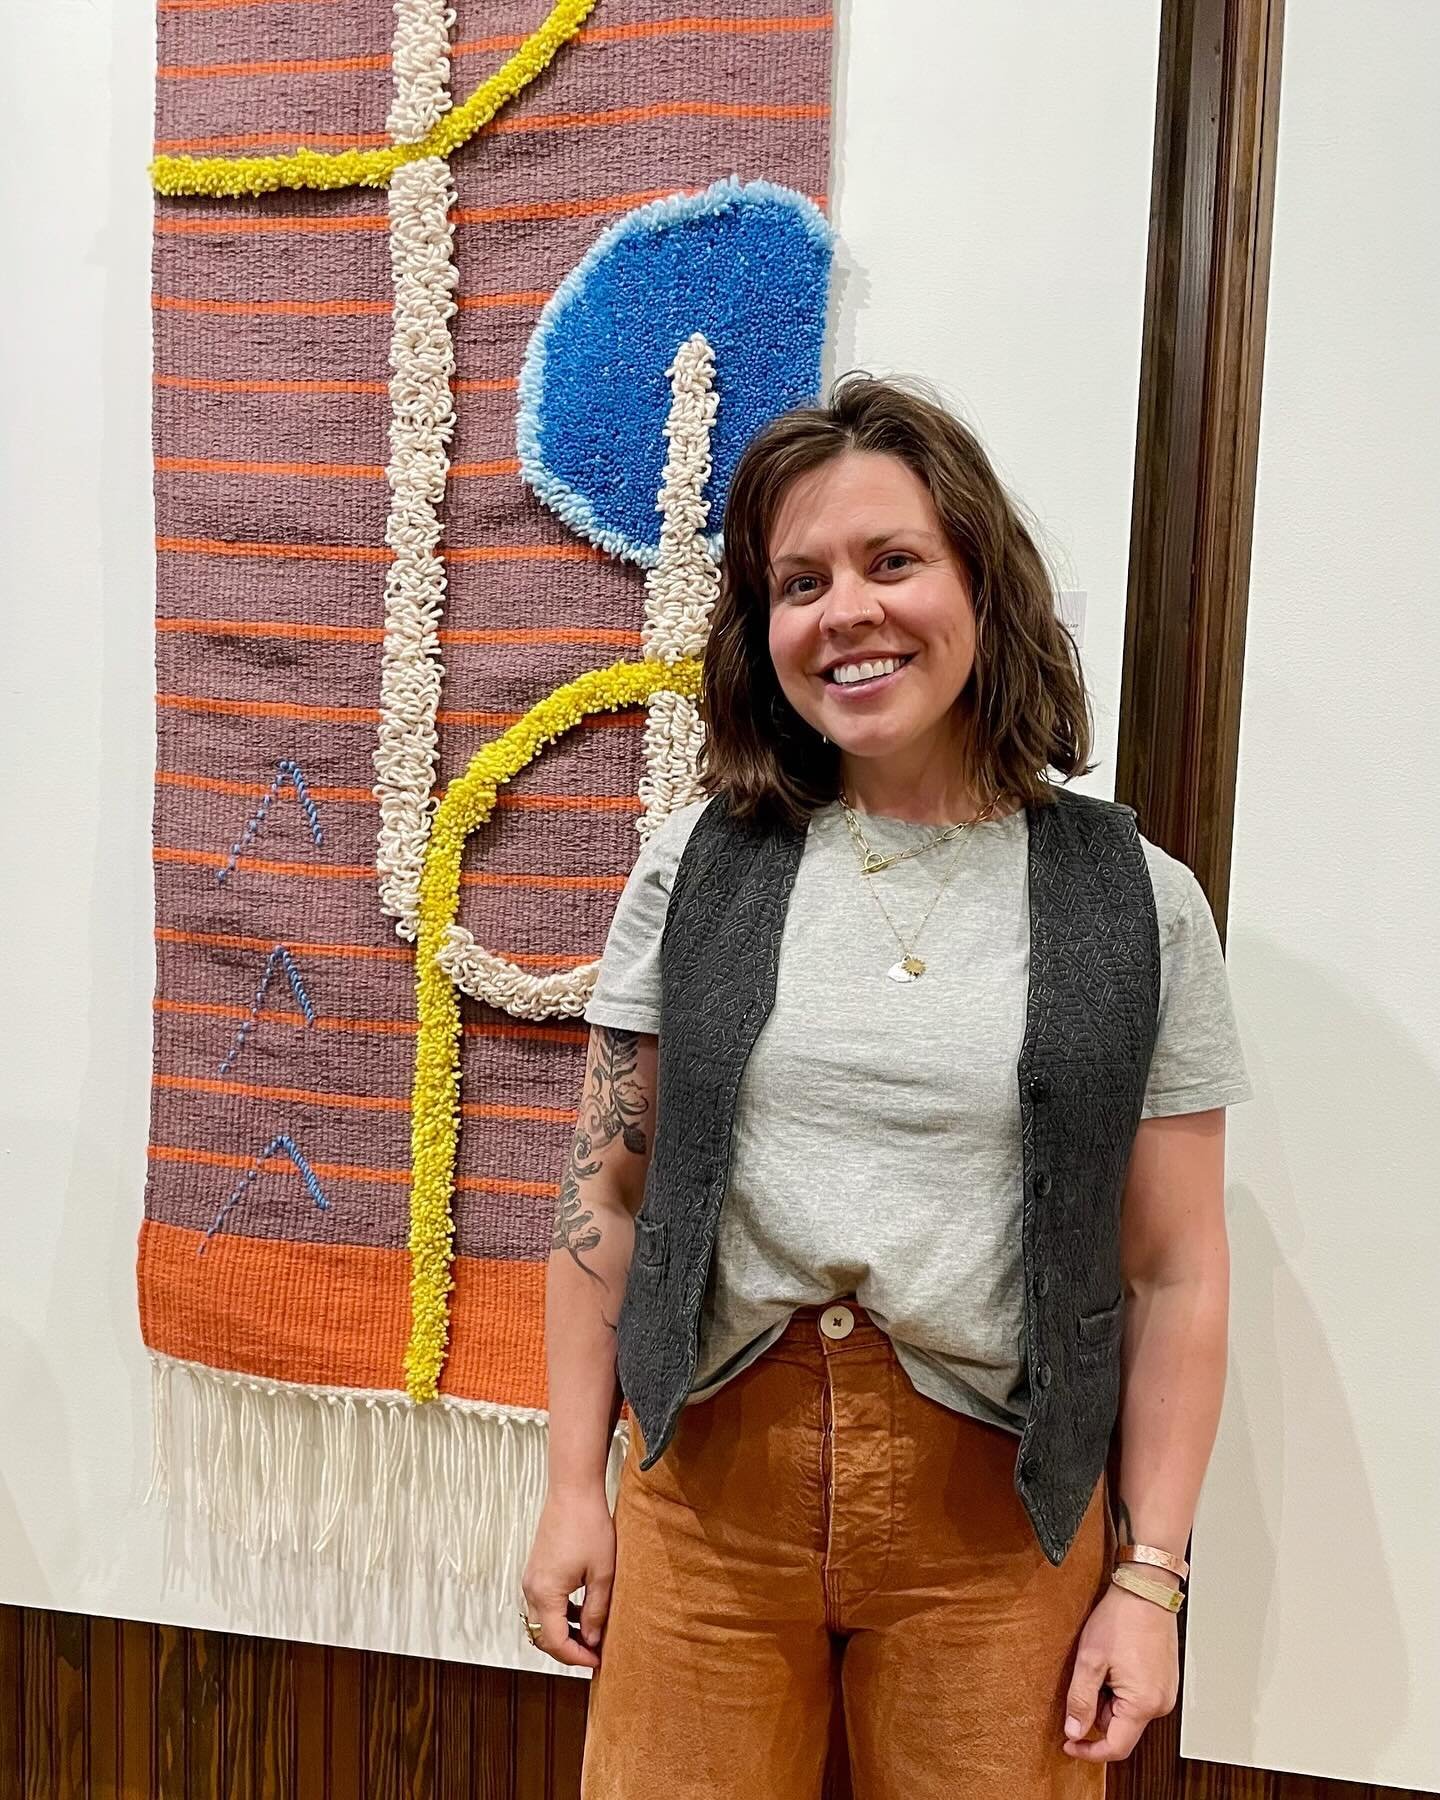 You can now see a selection of Cactus Blossom founder @jessikonley &lsquo;s work, with other inspiring local fiber artists at &lsquo;The Fiber of Being&rsquo; on display until June 1st at @livingstoncenter4artandculture . You can also find Jessi&rsqu